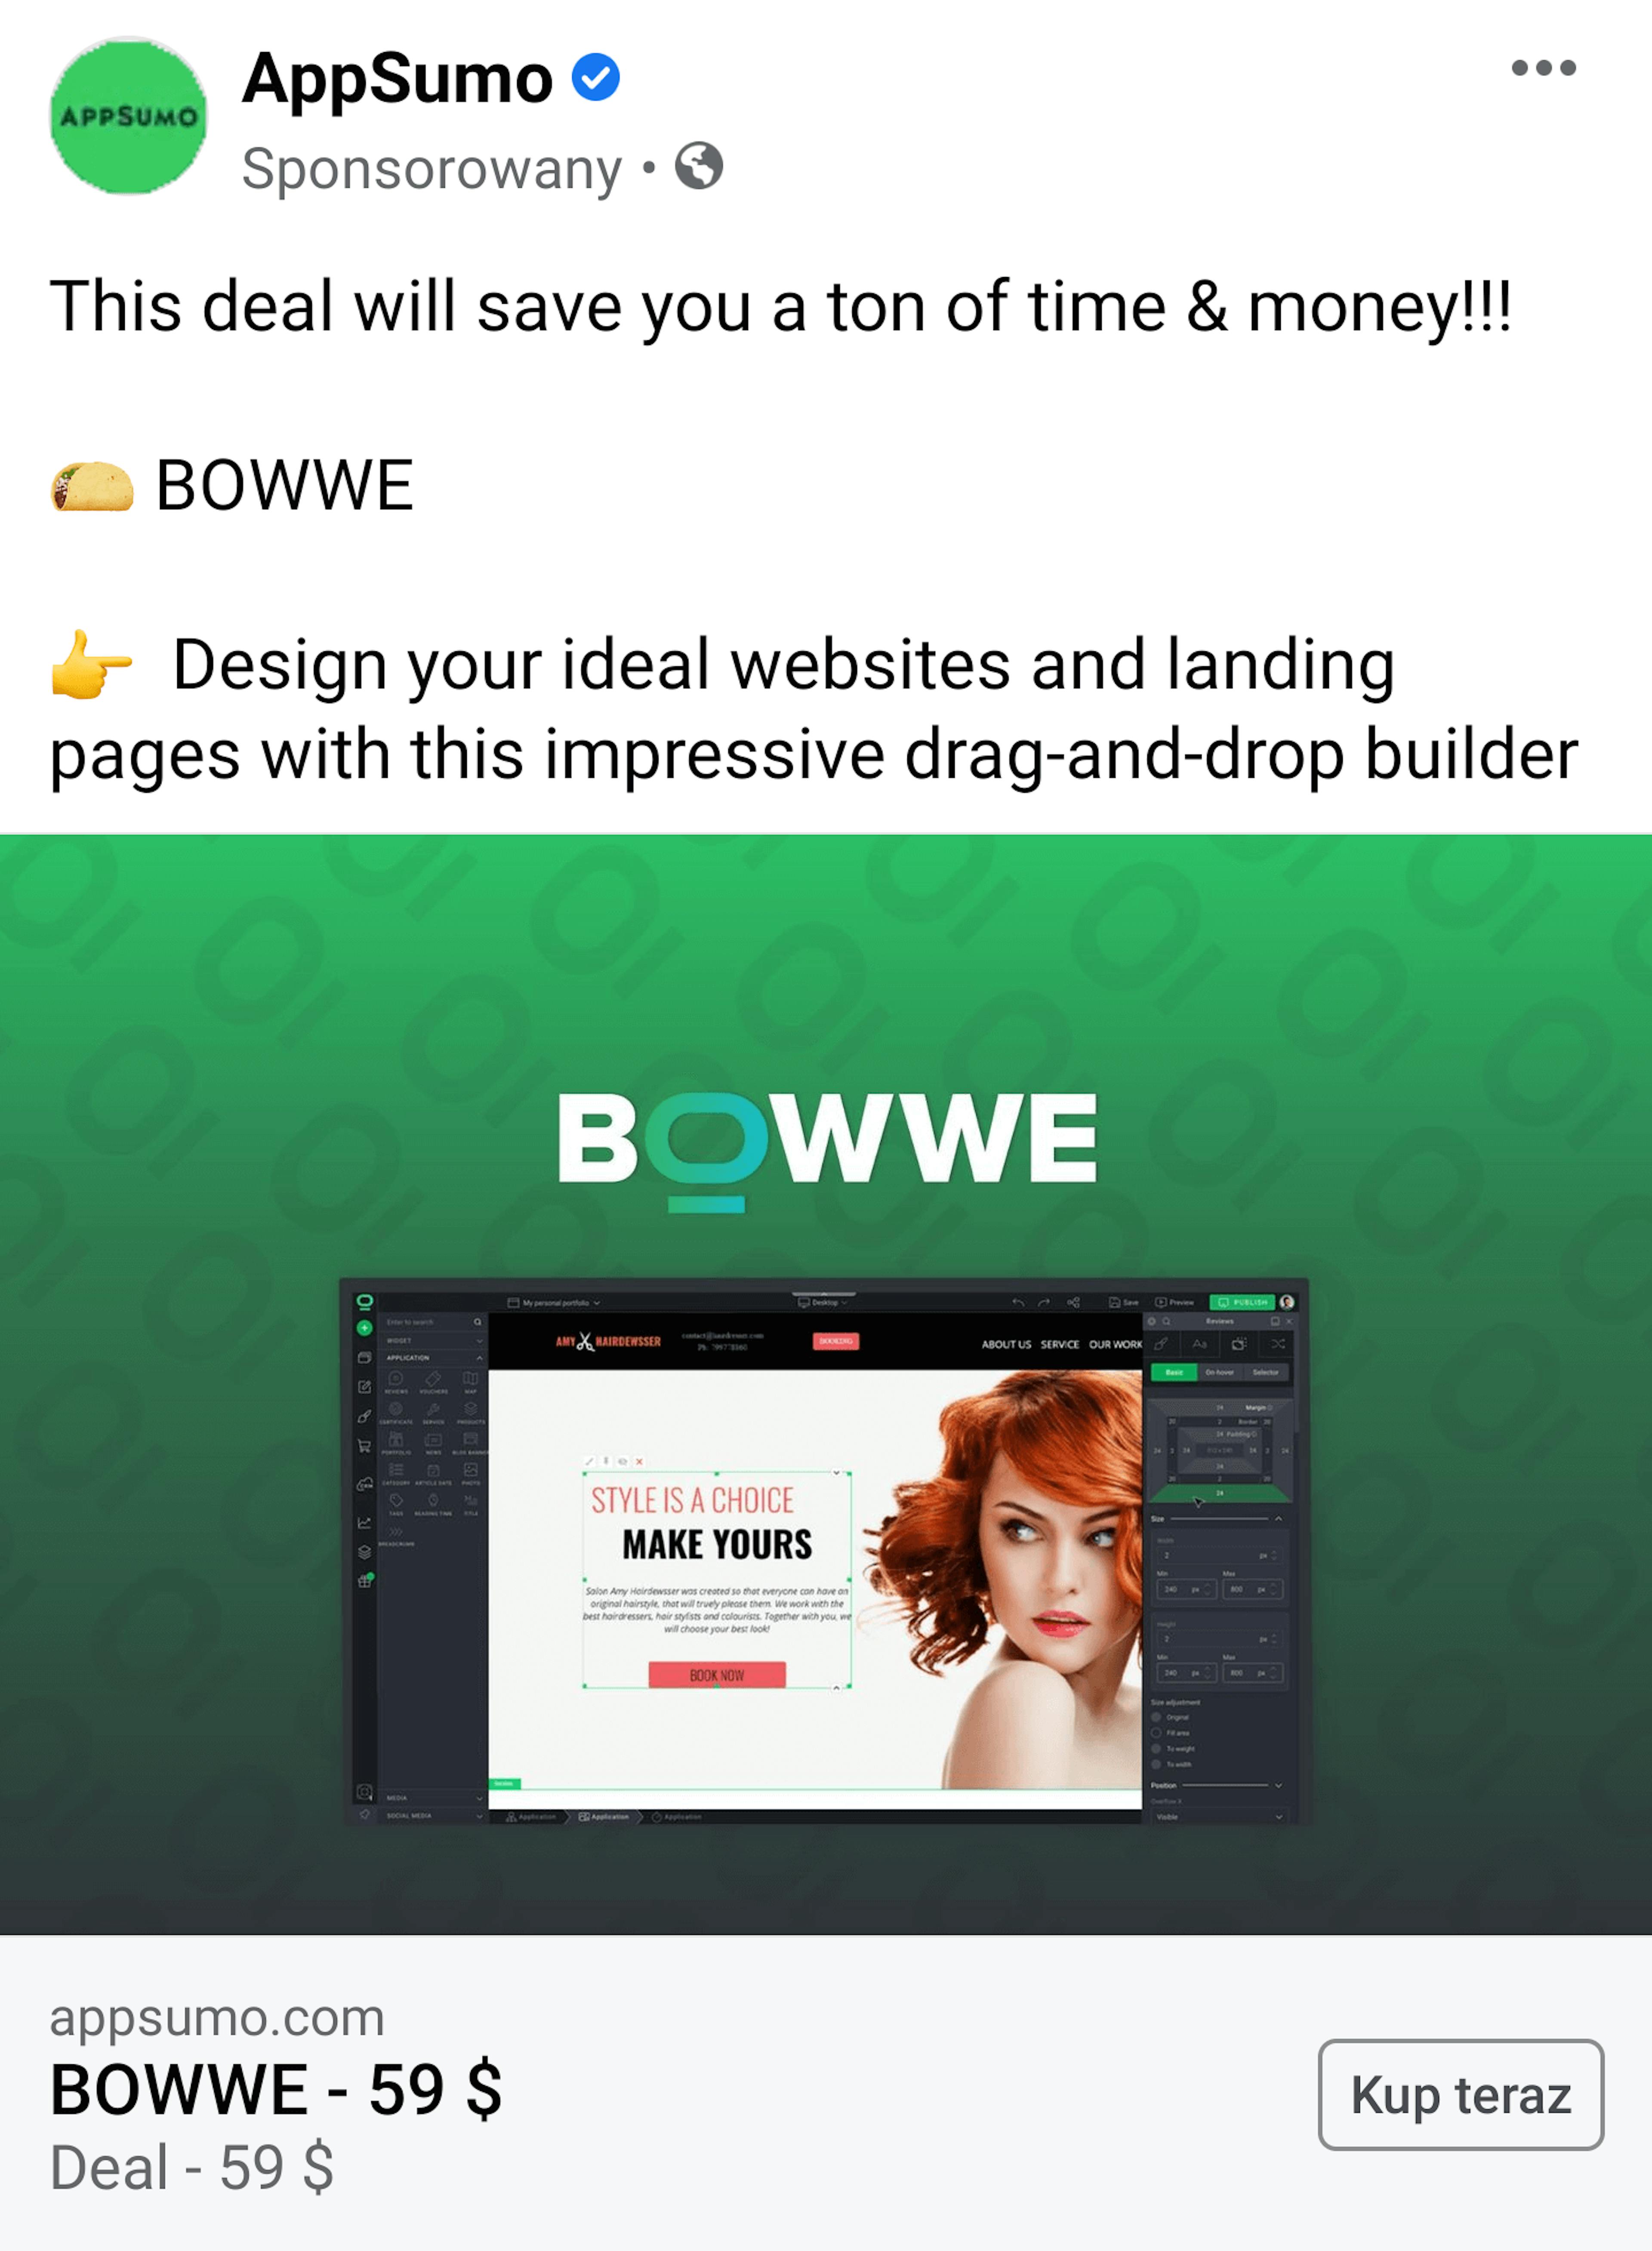 Ads about BOWWE by AppSumo